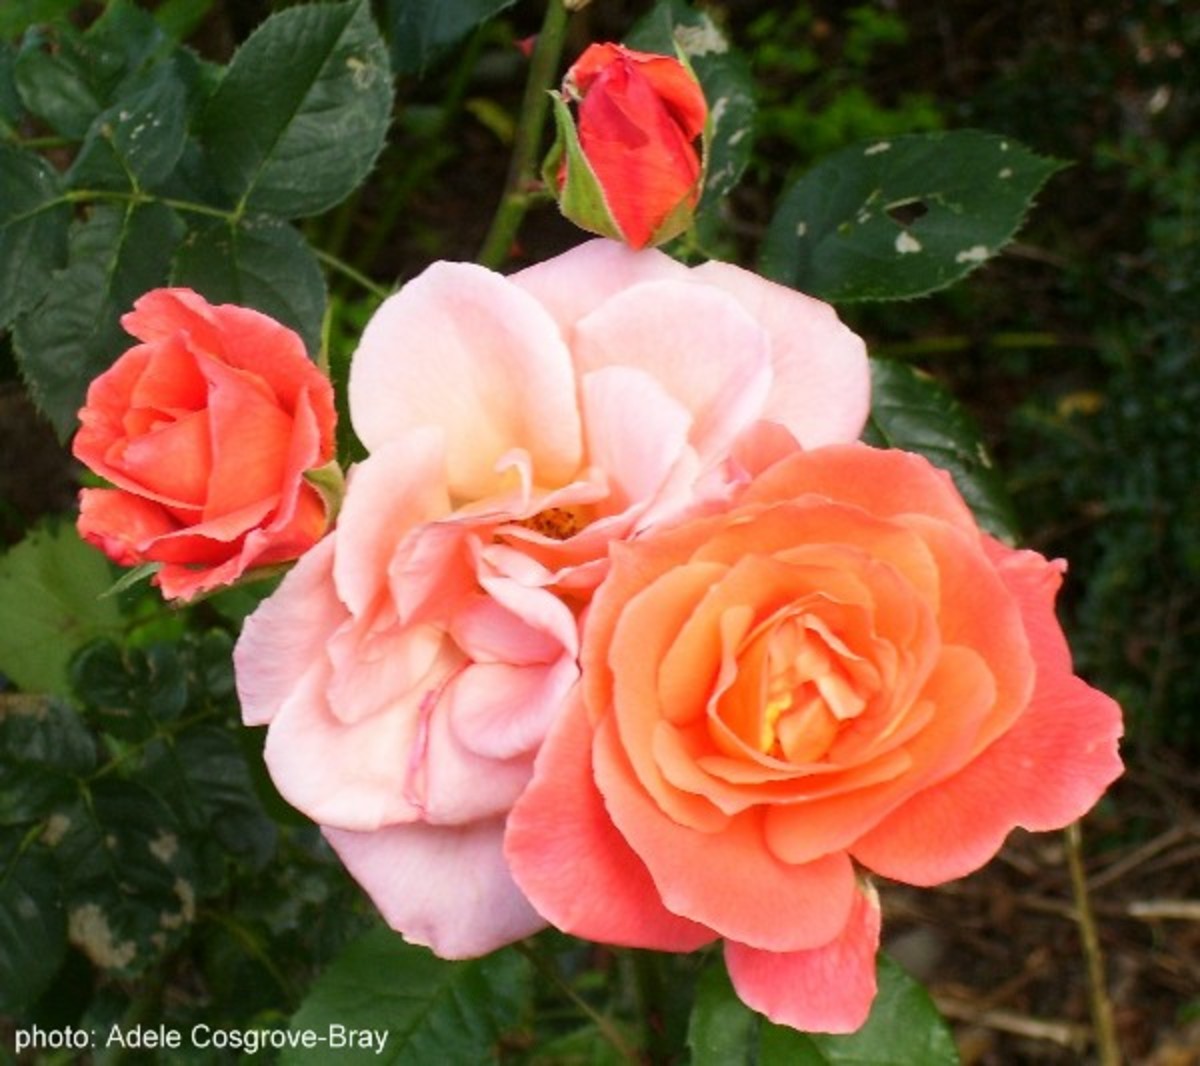 Roses are an old favourite, and they're so easy to grow even in the most difficult of soils.